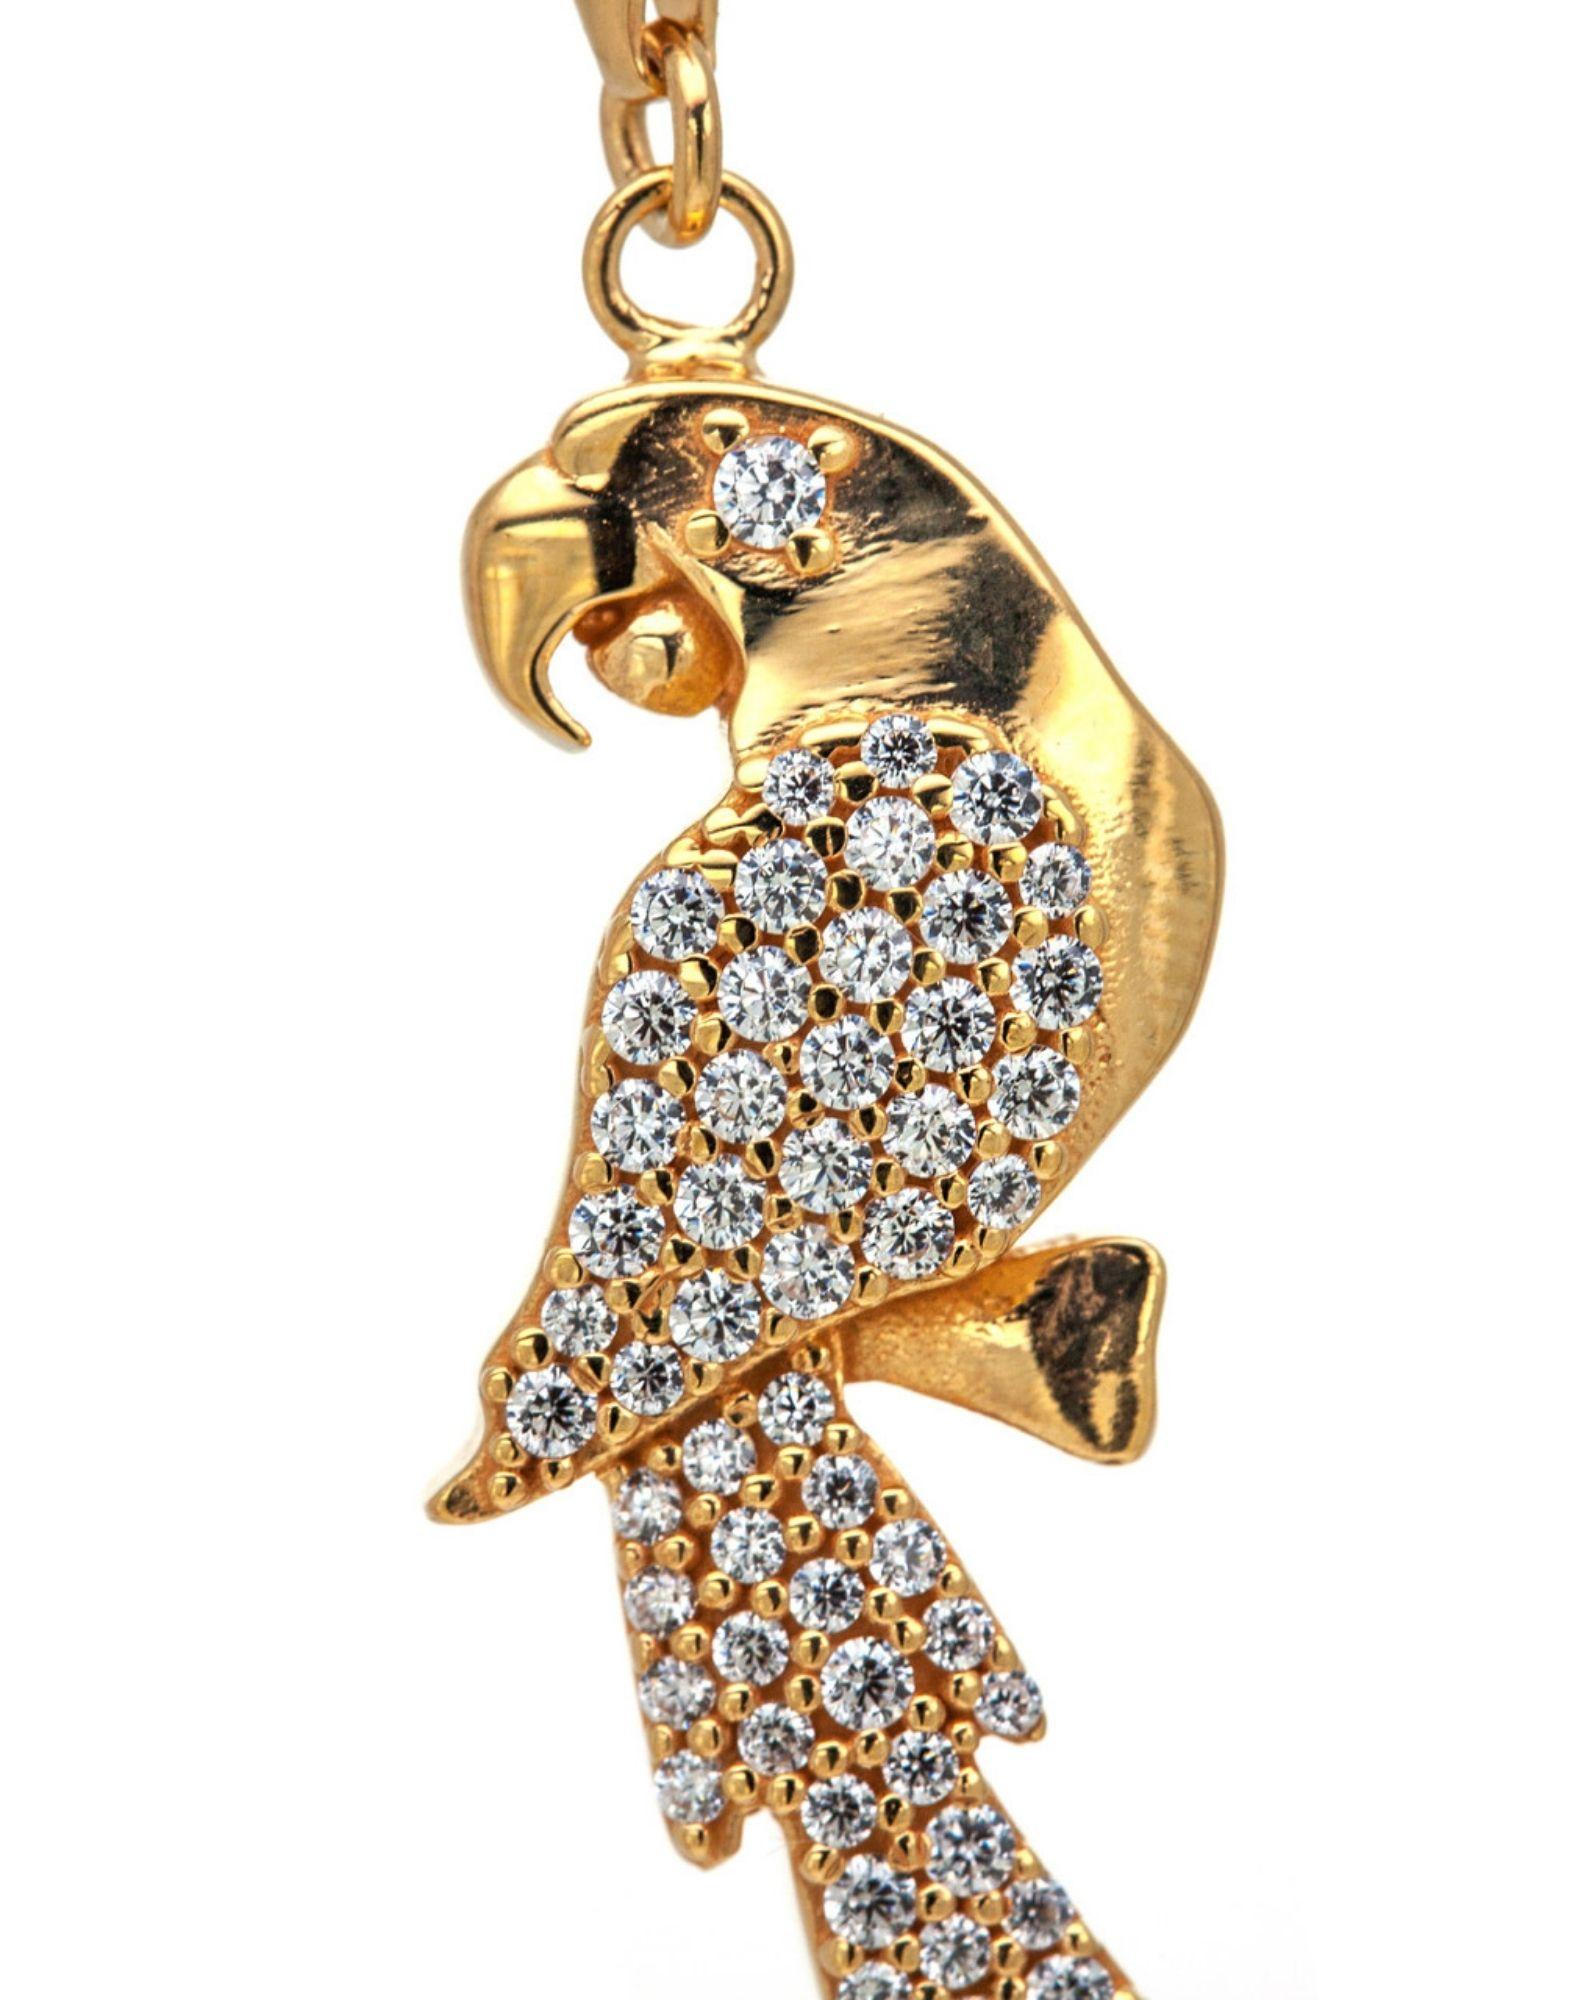 This parrot-shaped pendant is a representation of the beauty of nature in an elegant and refined key.

The parrot pendant has a snap hook that allows it to be detached and worn on any chain, made of 925 gold-plated sterling silver and studded with